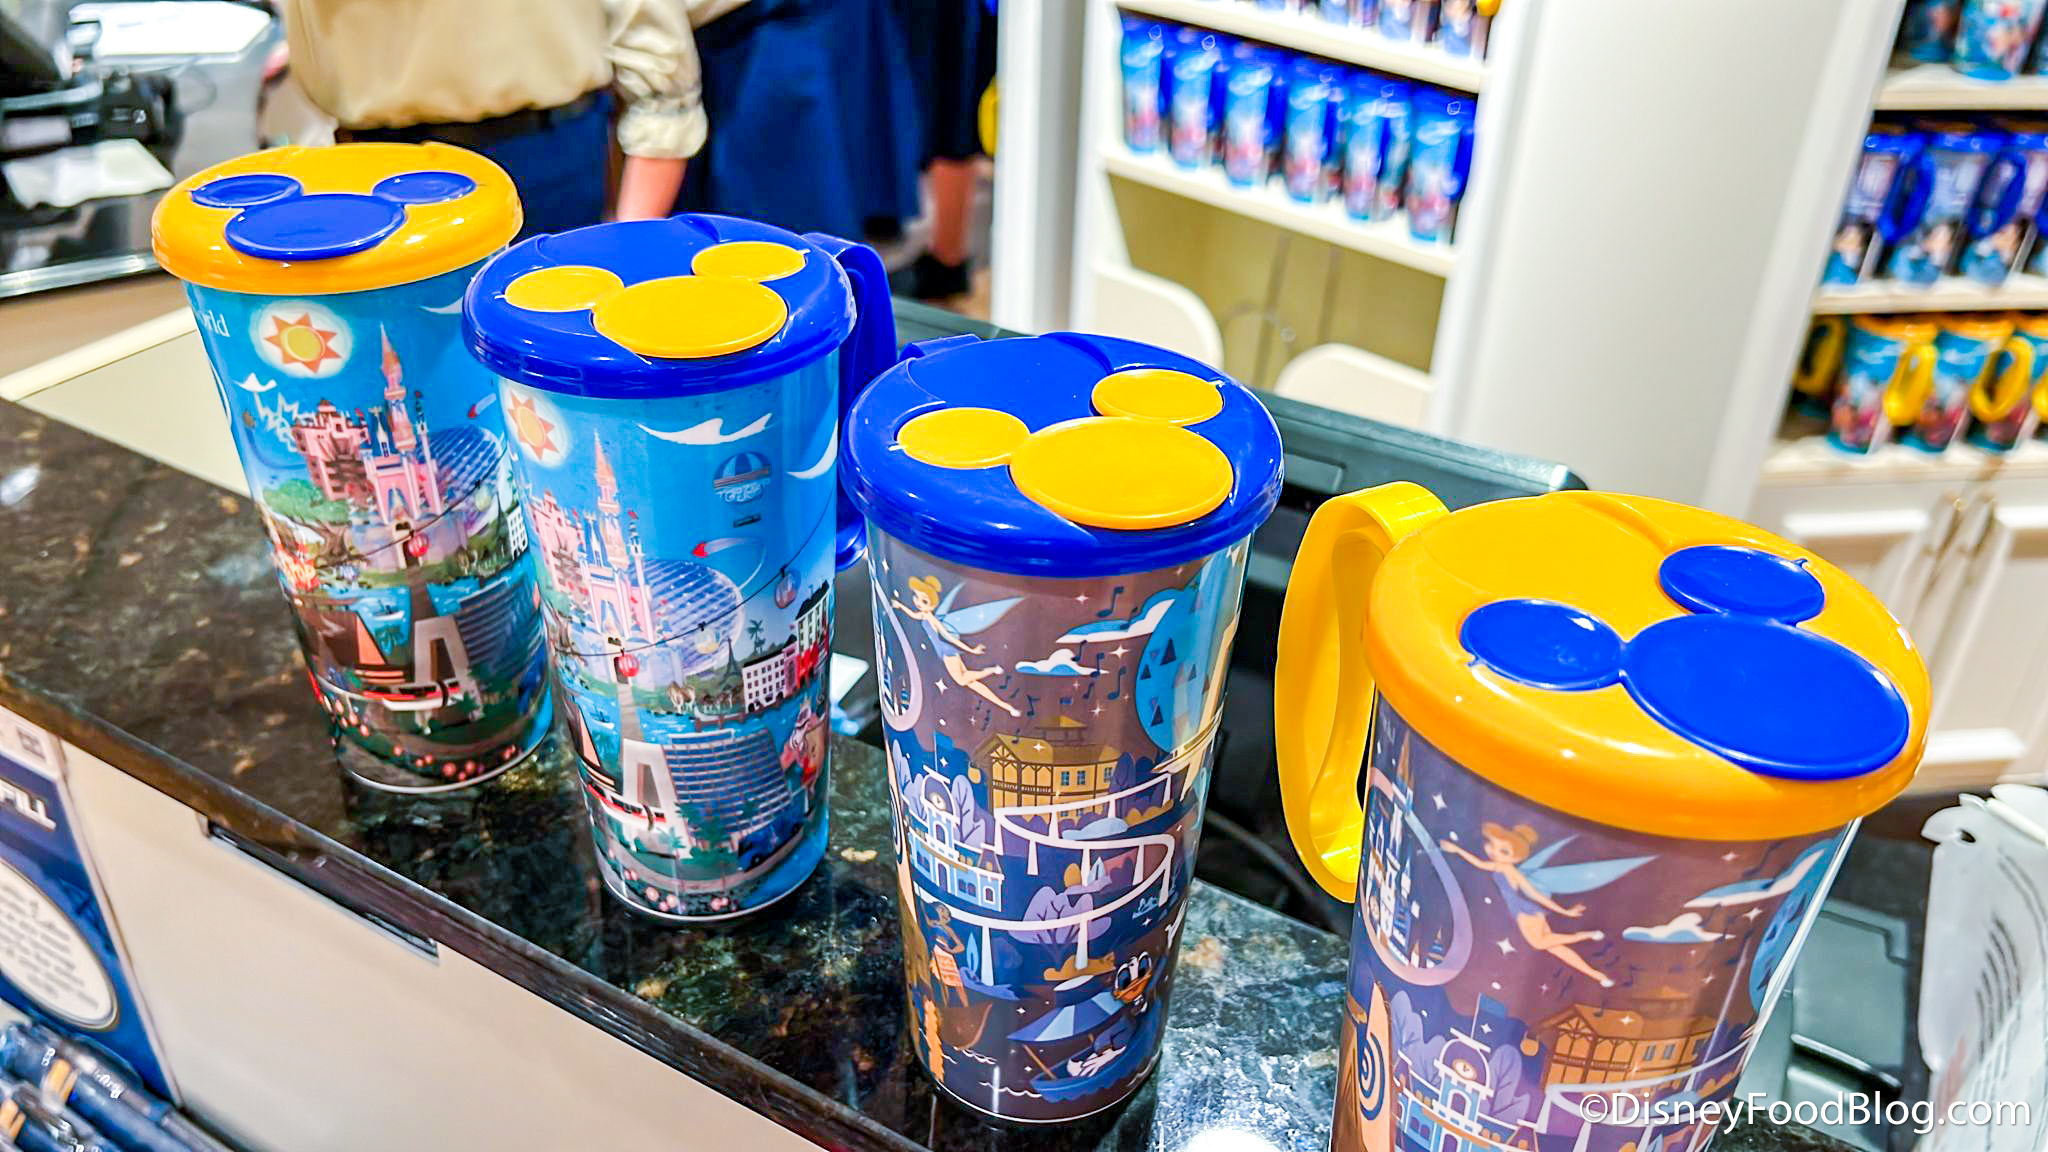 NEW Disney100 Refillable Mugs Available at Walt Disney World Resort Hotels  - WDW News Today